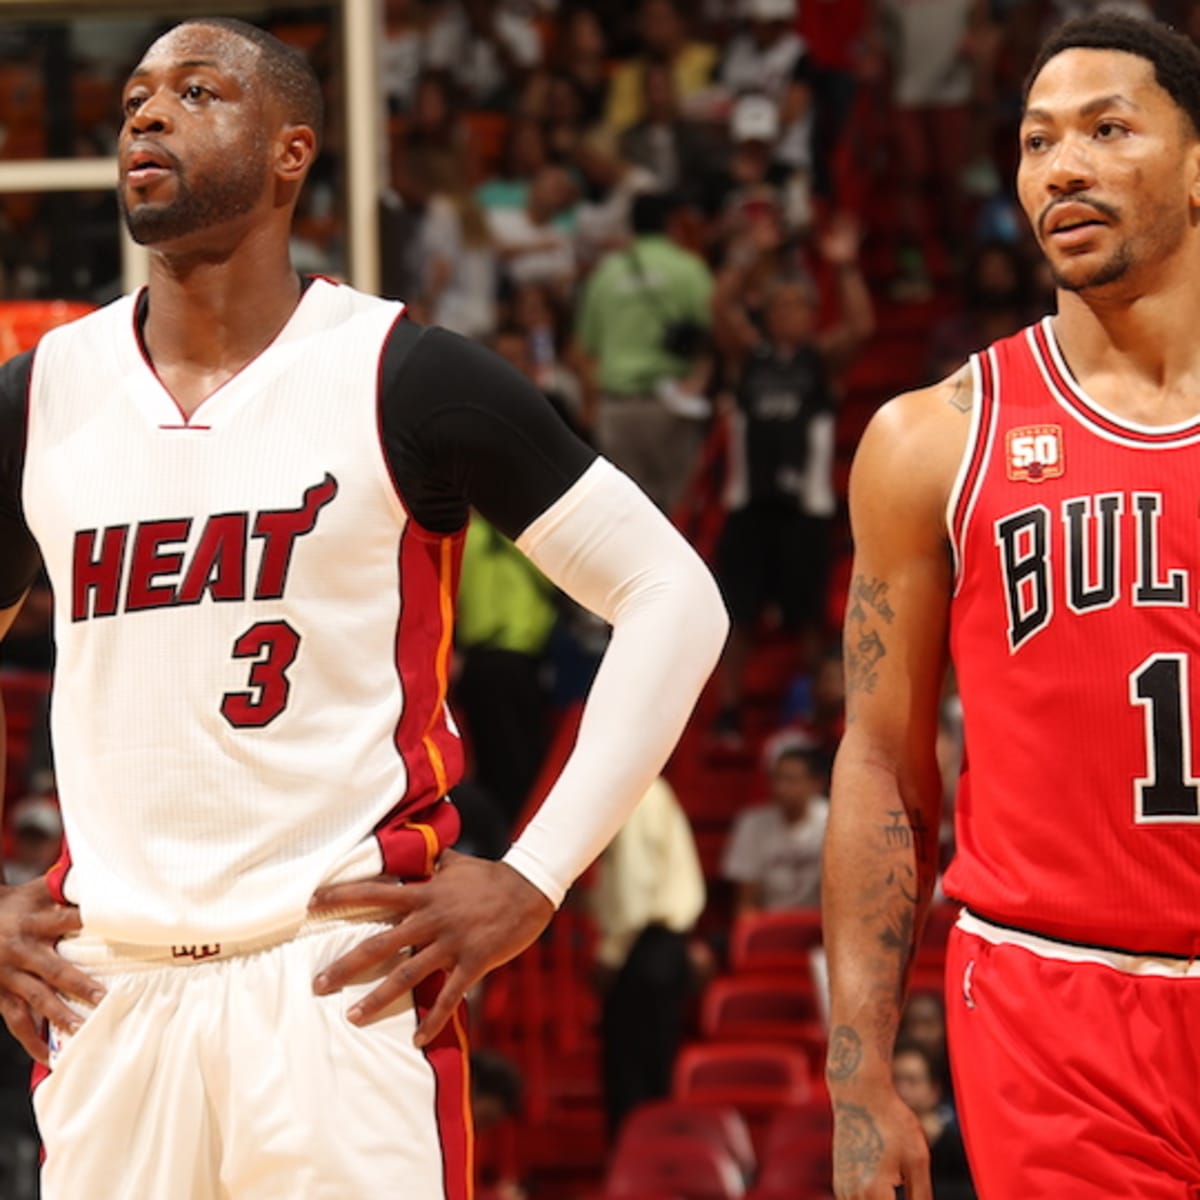 Dwyane Wade Says Chicago Bulls Are Not Playing 'Miami Basketball